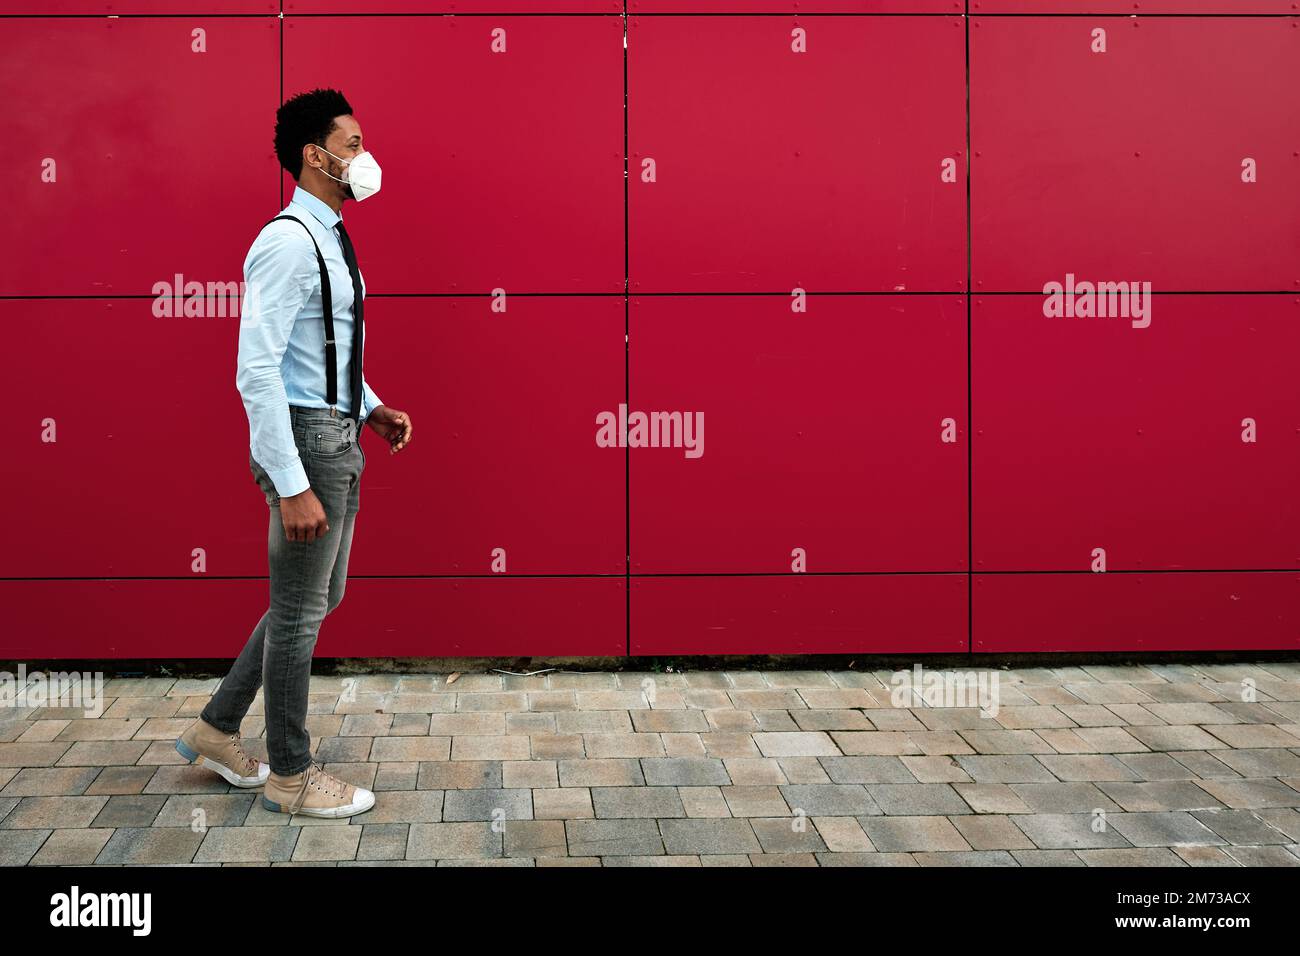 Man with face mask walking outdoors on the street. Stock Photo